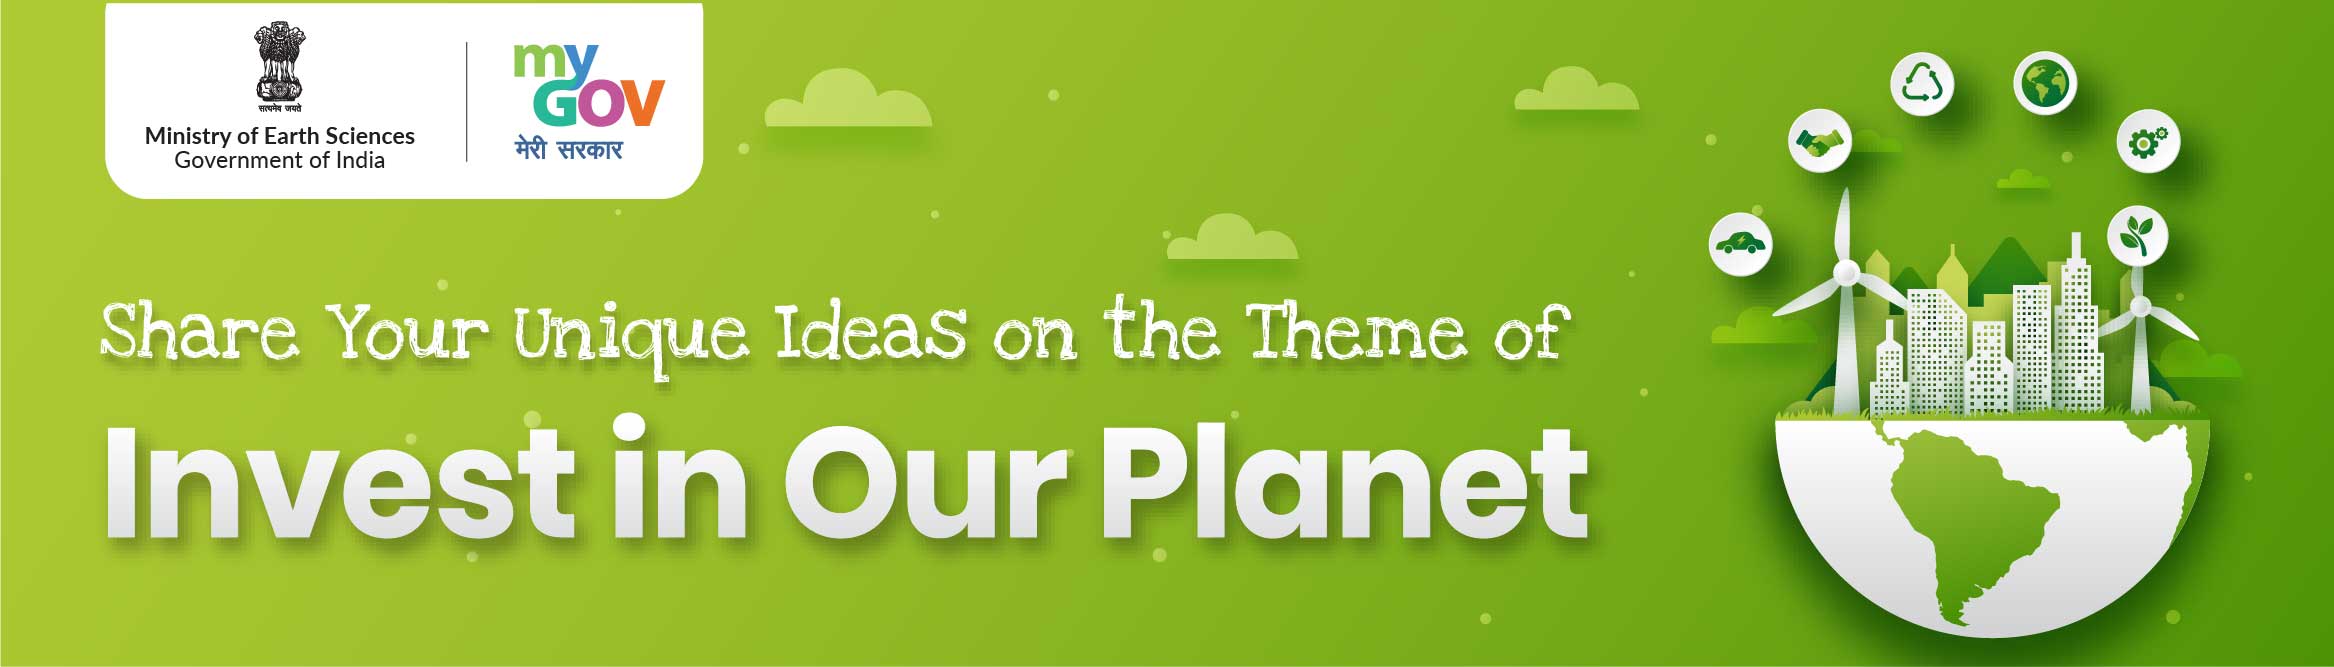 Share you unique Ideas on the theme of Invest in Our Planet